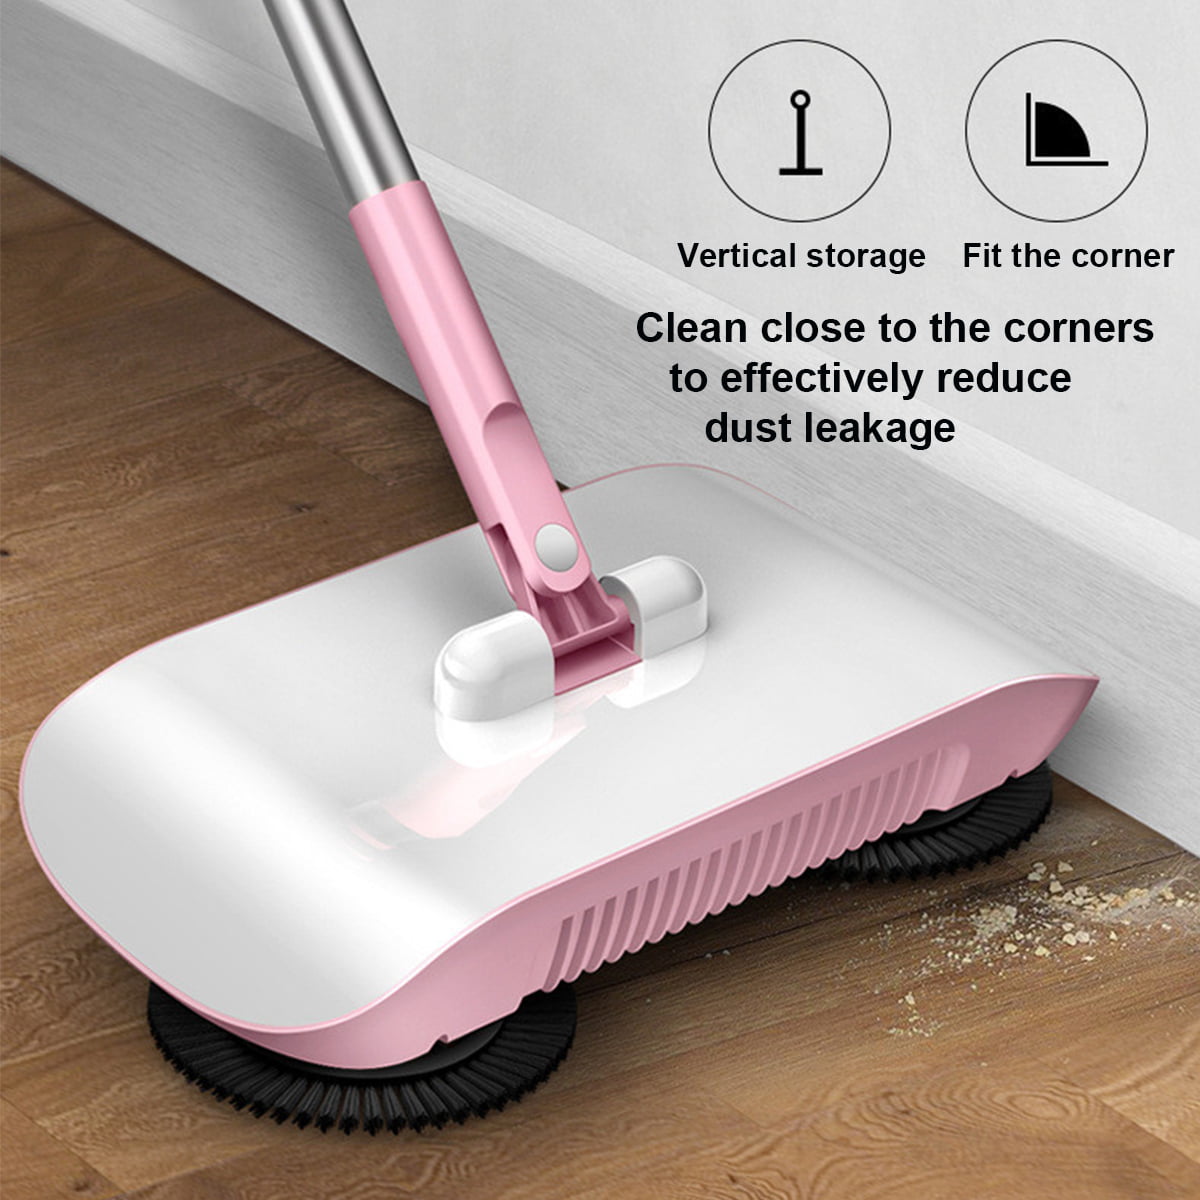 Including Broom & Dustpan & Trash Bin Cleaner Without Electricity Environmenta With 360 rotation SAIF Automatic Hand Sweeper Broom 3 in 1 Household Cleaning Hand Push 